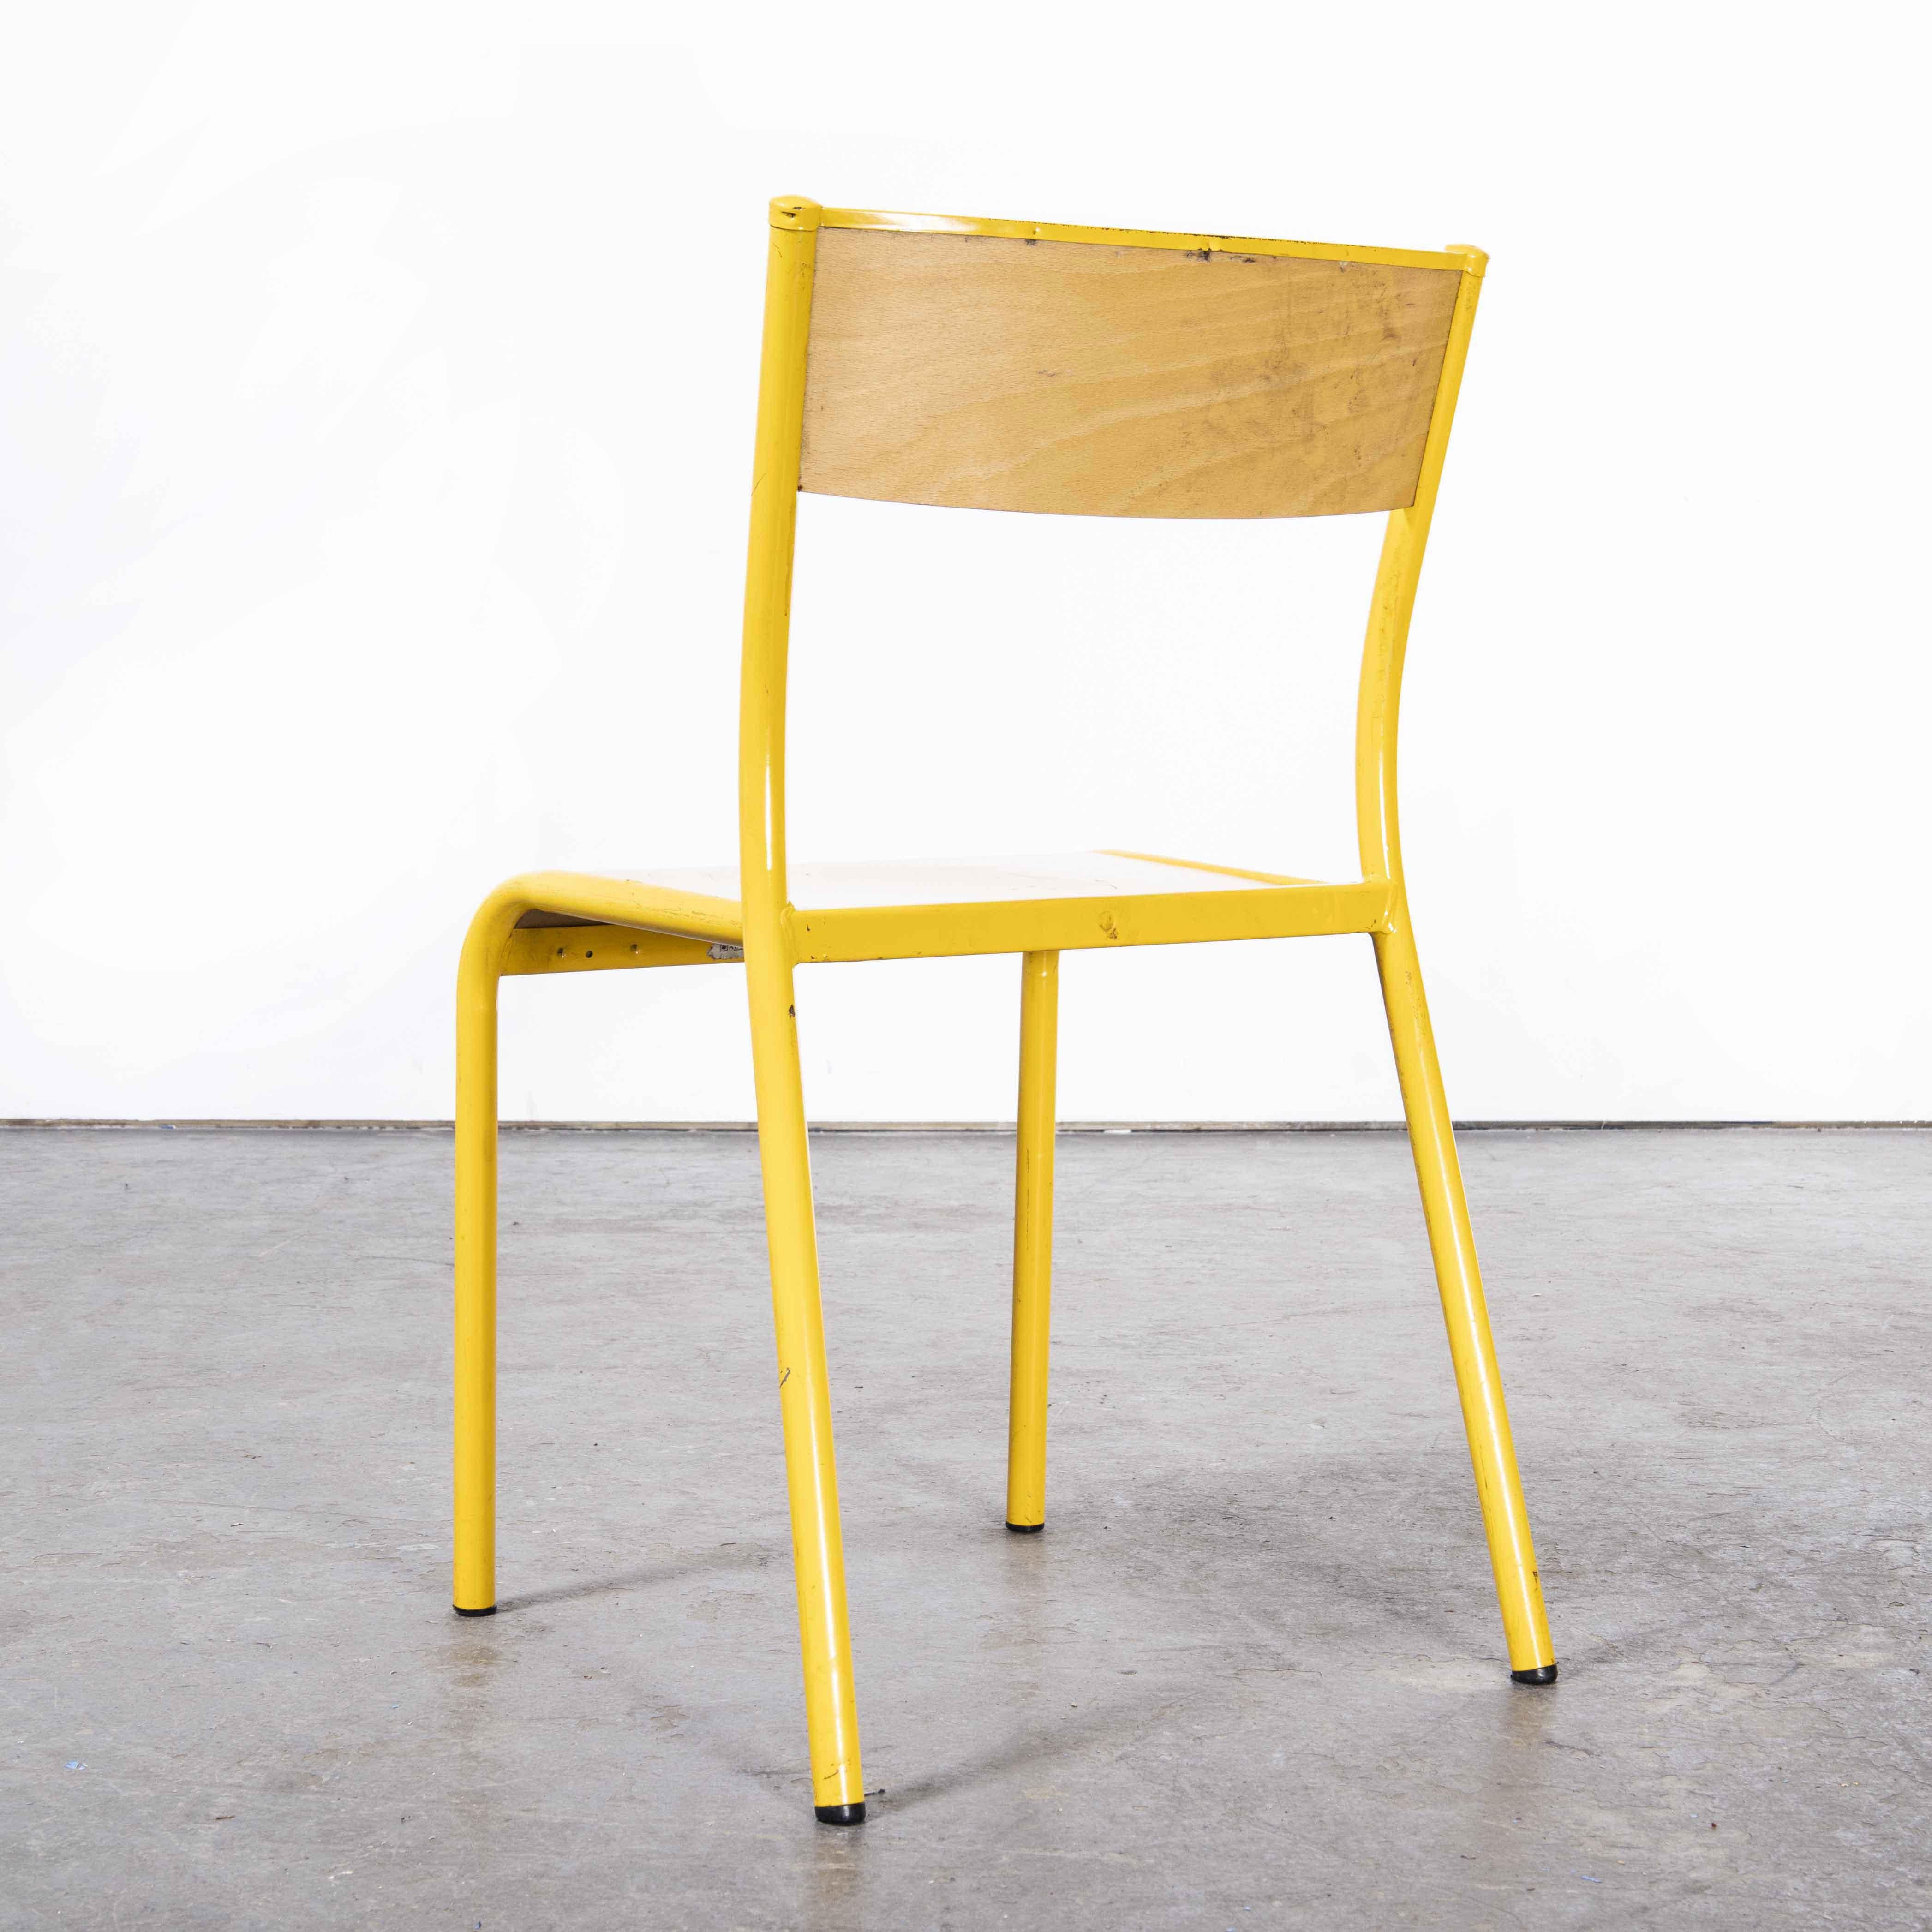 1970’s French Mullca stacking – dining chairs – wide yellow 510 – set of six

1970’s French Mullca stacking – dining chairs – wide yellow 510 – set of six. One of our most favourite chairs, in 1947 Robert Muller and Gaston Cavaillon created the